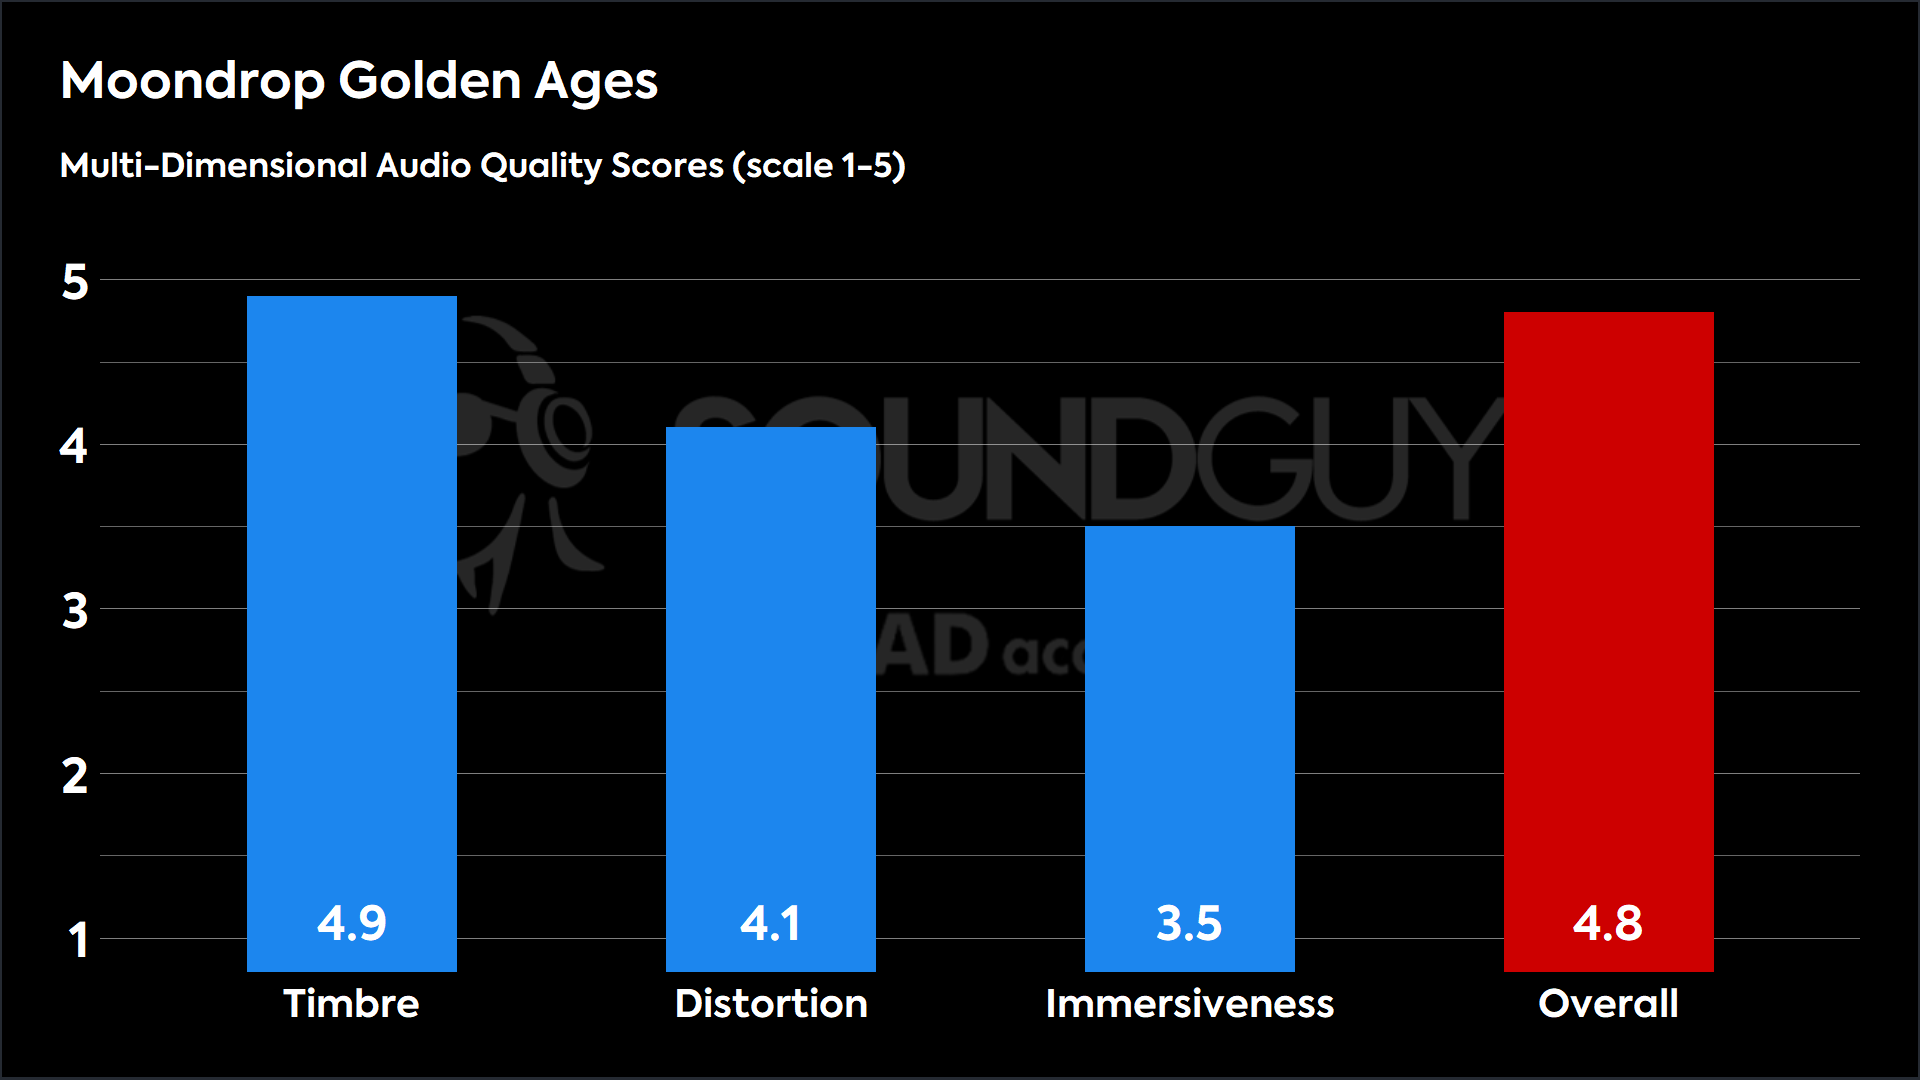 This chart shows the MDAQS results for the Moondrop Golden Ages in Default mode. The Timbre score is 4.9, The Distortion score is 4.1, the Immersiveness score is 3.5, and the Overall Score is 4.8).